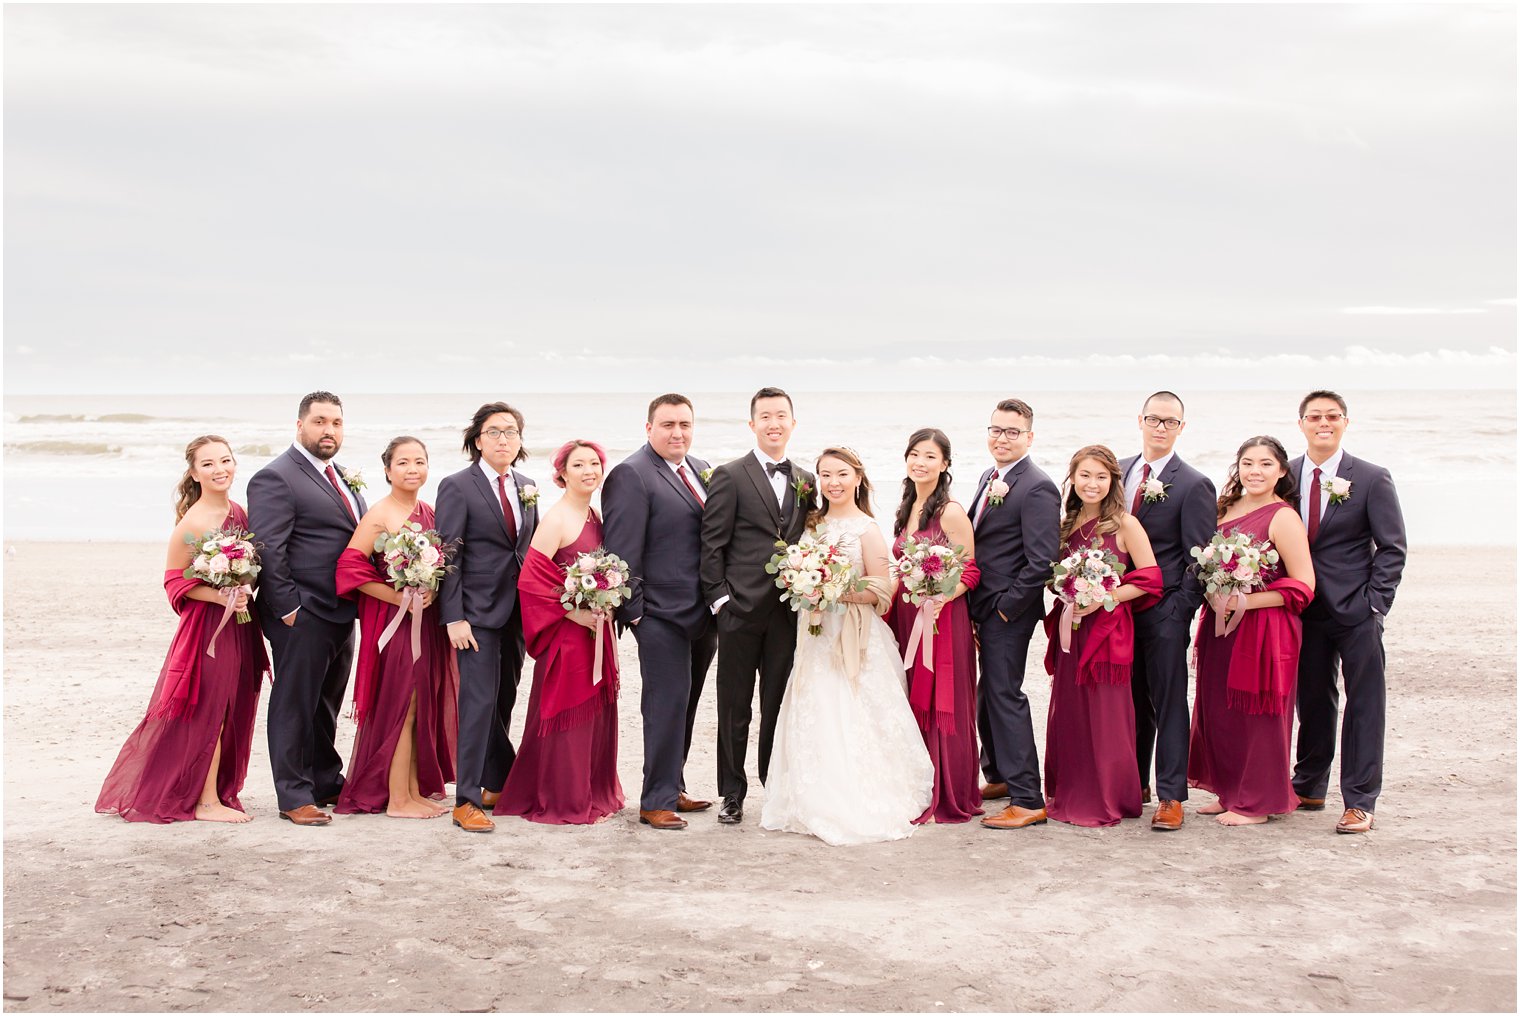 Bridal party wearing burgundy and navy